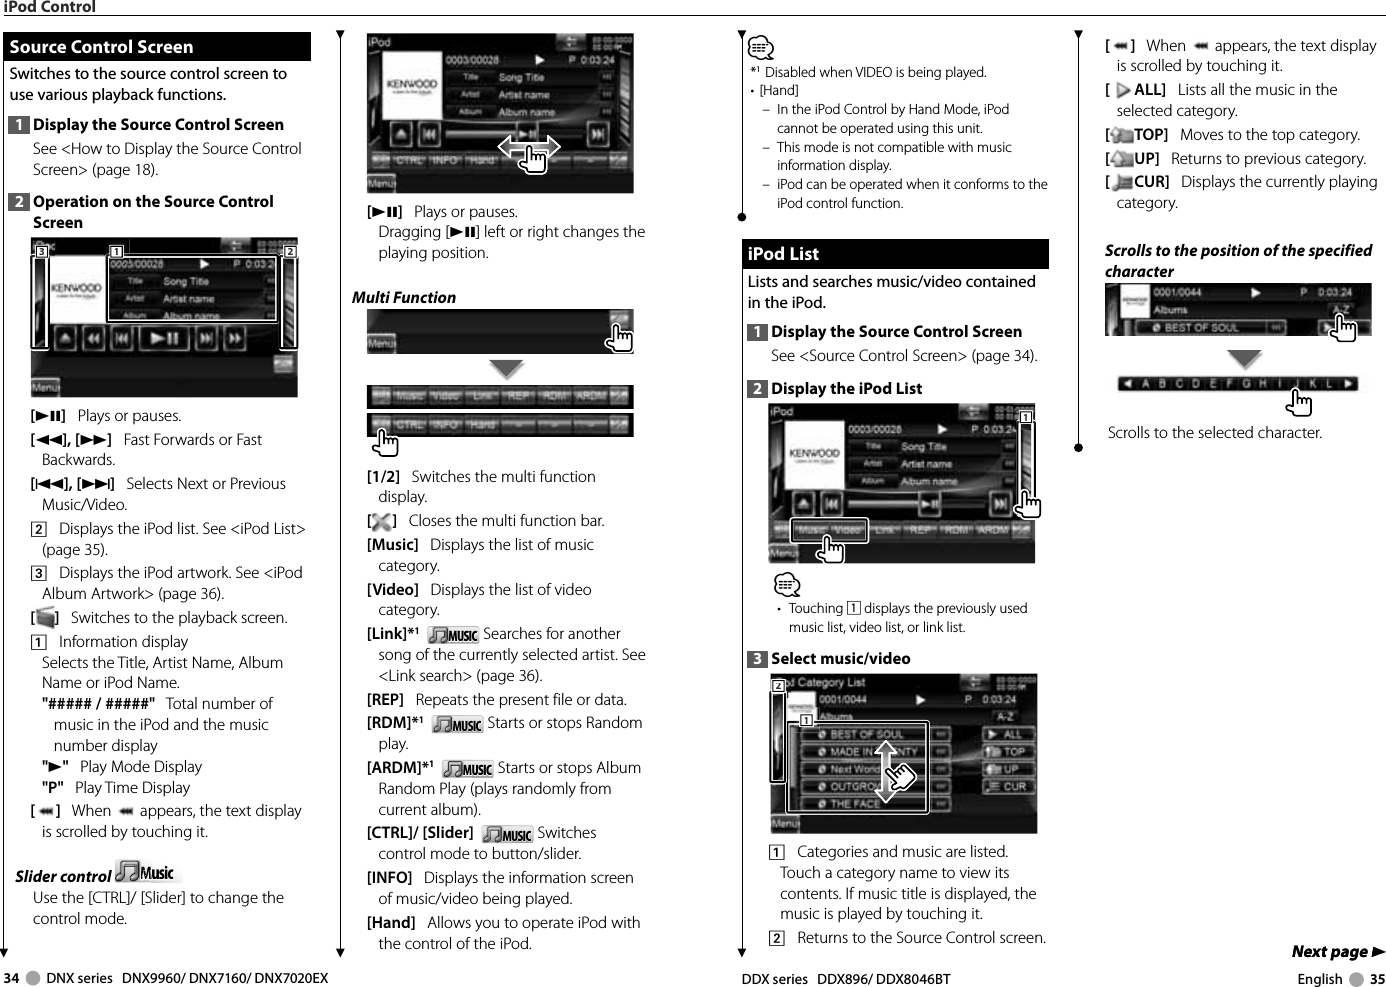 34     DNX series   DNX9960/ DNX7160/ DNX7020EX DDX series   DDX896/ DDX8046BT English     35Next page 3Next page 3[]   When   appears, the text display is scrolled by touching it.[ALL]   Lists all the music in the selected category.[TOP]   Moves to the top category.[UP]   Returns to previous category.[CUR]   Displays the currently playing category.Scrolls to the position of the specified characterScrolls to the selected character.⁄*1 Disabled when VIDEO is being played.• [Hand]–  In the iPod Control by Hand Mode, iPod cannot be operated using this unit.–  This mode is not compatible with music information display. –  iPod can be operated when it conforms to the iPod control function. iPod List iPod  ListLists and searches music/video contained in the iPod.1  Display the Source Control ScreenSee &lt;Source Control Screen&gt; (page 34). 2  Display the iPod List111⁄• Touching 1 displays the previously used music list, video list, or link list.3  Select music/video2221111    Categories and music are listed. Touch a category name to view its contents. If music title is displayed, the music is played by touching it.2    Returns to the Source Control screen.iPod Control[38]   Plays or pauses.Dragging [38] left or right changes the playing position.Multi Function[1/2]   Switches the multi function display.[]   Closes the multi function bar.[Music]   Displays the list of music category. [Video]   Displays the list of video category. [Link]*1   MUSICMUSIC  Searches for another song of the currently selected artist. See &lt;Link search&gt; (page 36).[REP]   Repeats the present file or data.[RDM]*1   MUSICMUSIC  Starts or stops Random play.[ARDM]*1   MUSICMUSIC  Starts or stops Album Random Play (plays randomly from current album).[CTRL]/ [Slider]   MUSICMUSIC  Switches control mode to button/slider. [INFO]   Displays the information screen of music/video being played.[Hand]   Allows you to operate iPod with the control of the iPod. Source Control Screen Source Control ScreenSwitches to the source control screen to use various playback functions.1  Display the Source Control ScreenSee &lt;How to Display the Source Control Screen&gt; (page 18). 2  Operation on the Source Control Screen111222333[38]   Plays or pauses.[1], [¡]   Fast Forwards or Fast Backwards.[4], [¢]   Selects Next or Previous Music/Video.2    Displays the iPod list. See &lt;iPod List&gt; (page 35).3    Displays the iPod artwork. See &lt;iPod Album Artwork&gt; (page 36).[]   Switches to the playback screen. 1    Information displaySelects the Title, Artist Name, Album Name or iPod Name.&quot;##### / #####&quot;   Total number of music in the iPod and the music number display&quot;3&quot;   Play Mode Display&quot;P&quot;   Play Time Display[]   When   appears, the text display is scrolled by touching it.Slider control  MusicMusicMMMMUse the [CTRL]/ [Slider] to change the control mode.